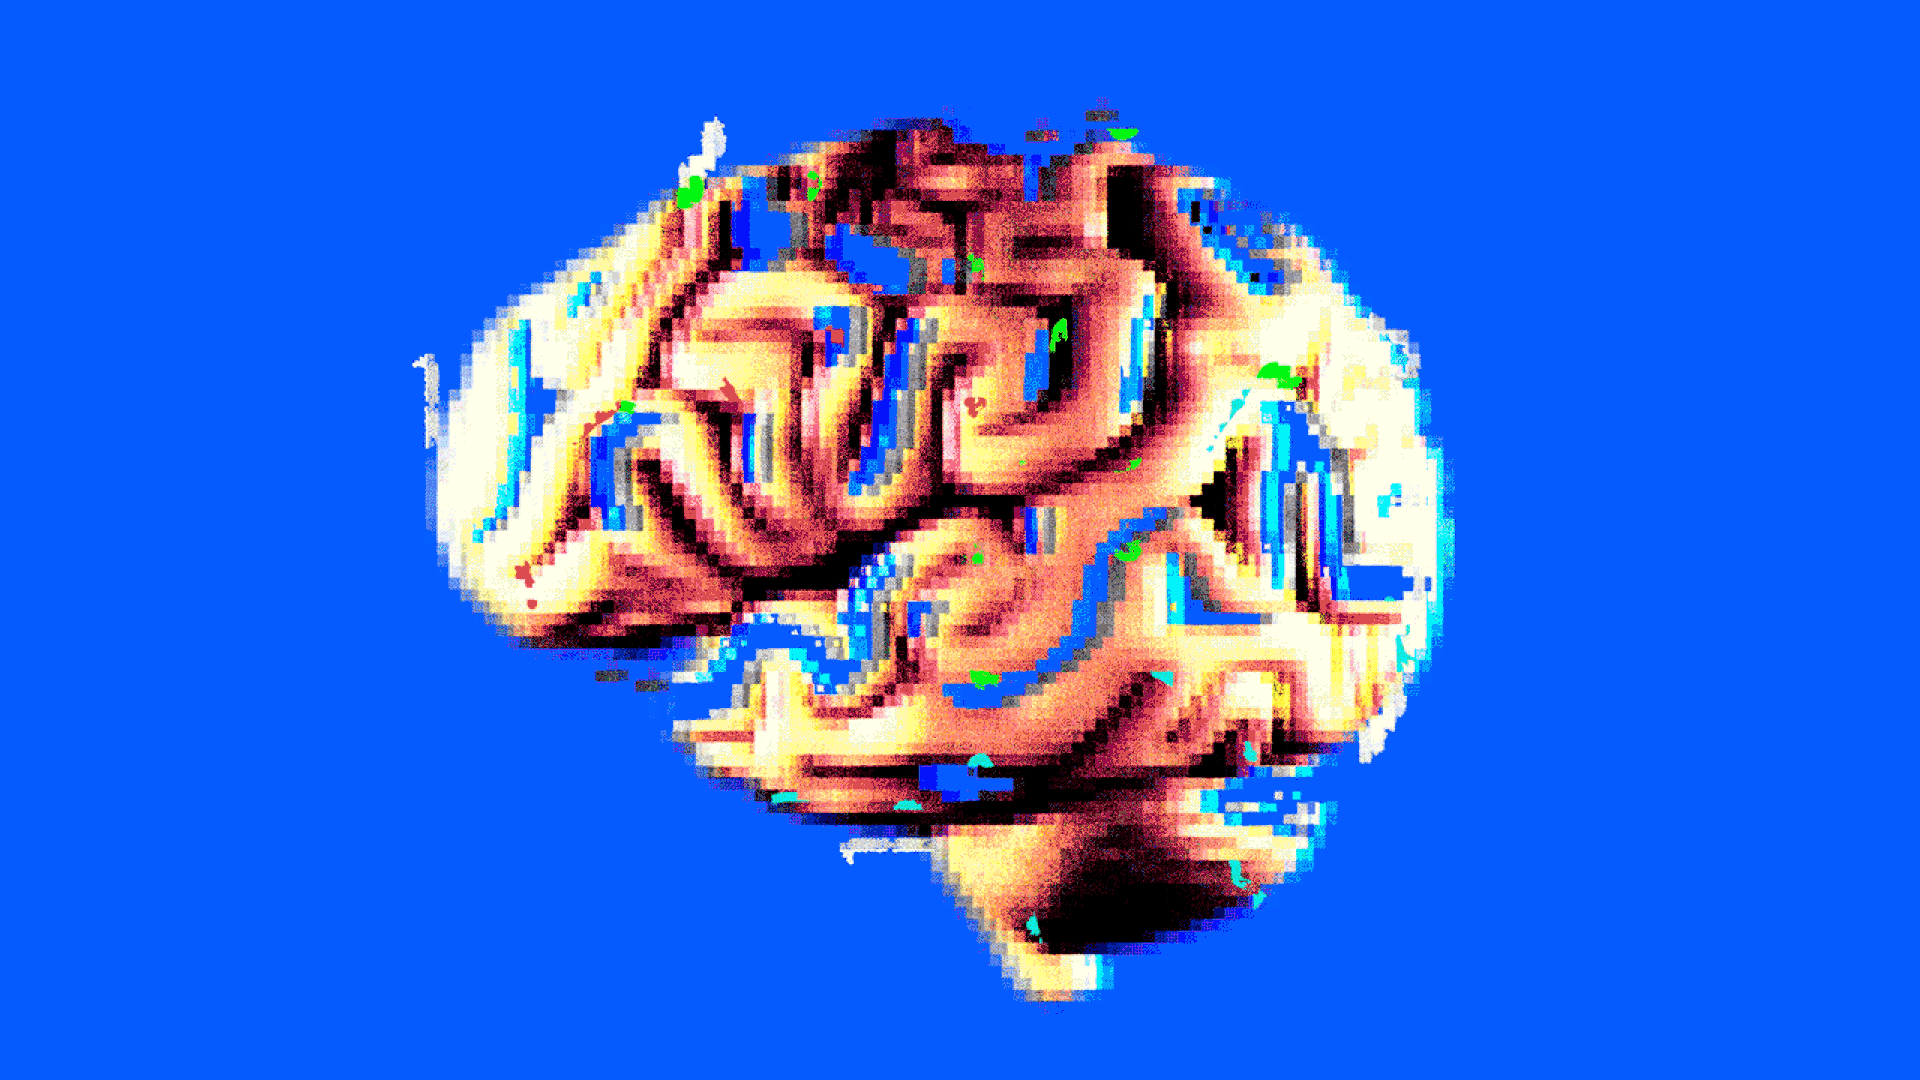 A pixelated illustration of a brain blurs vibrates in place.